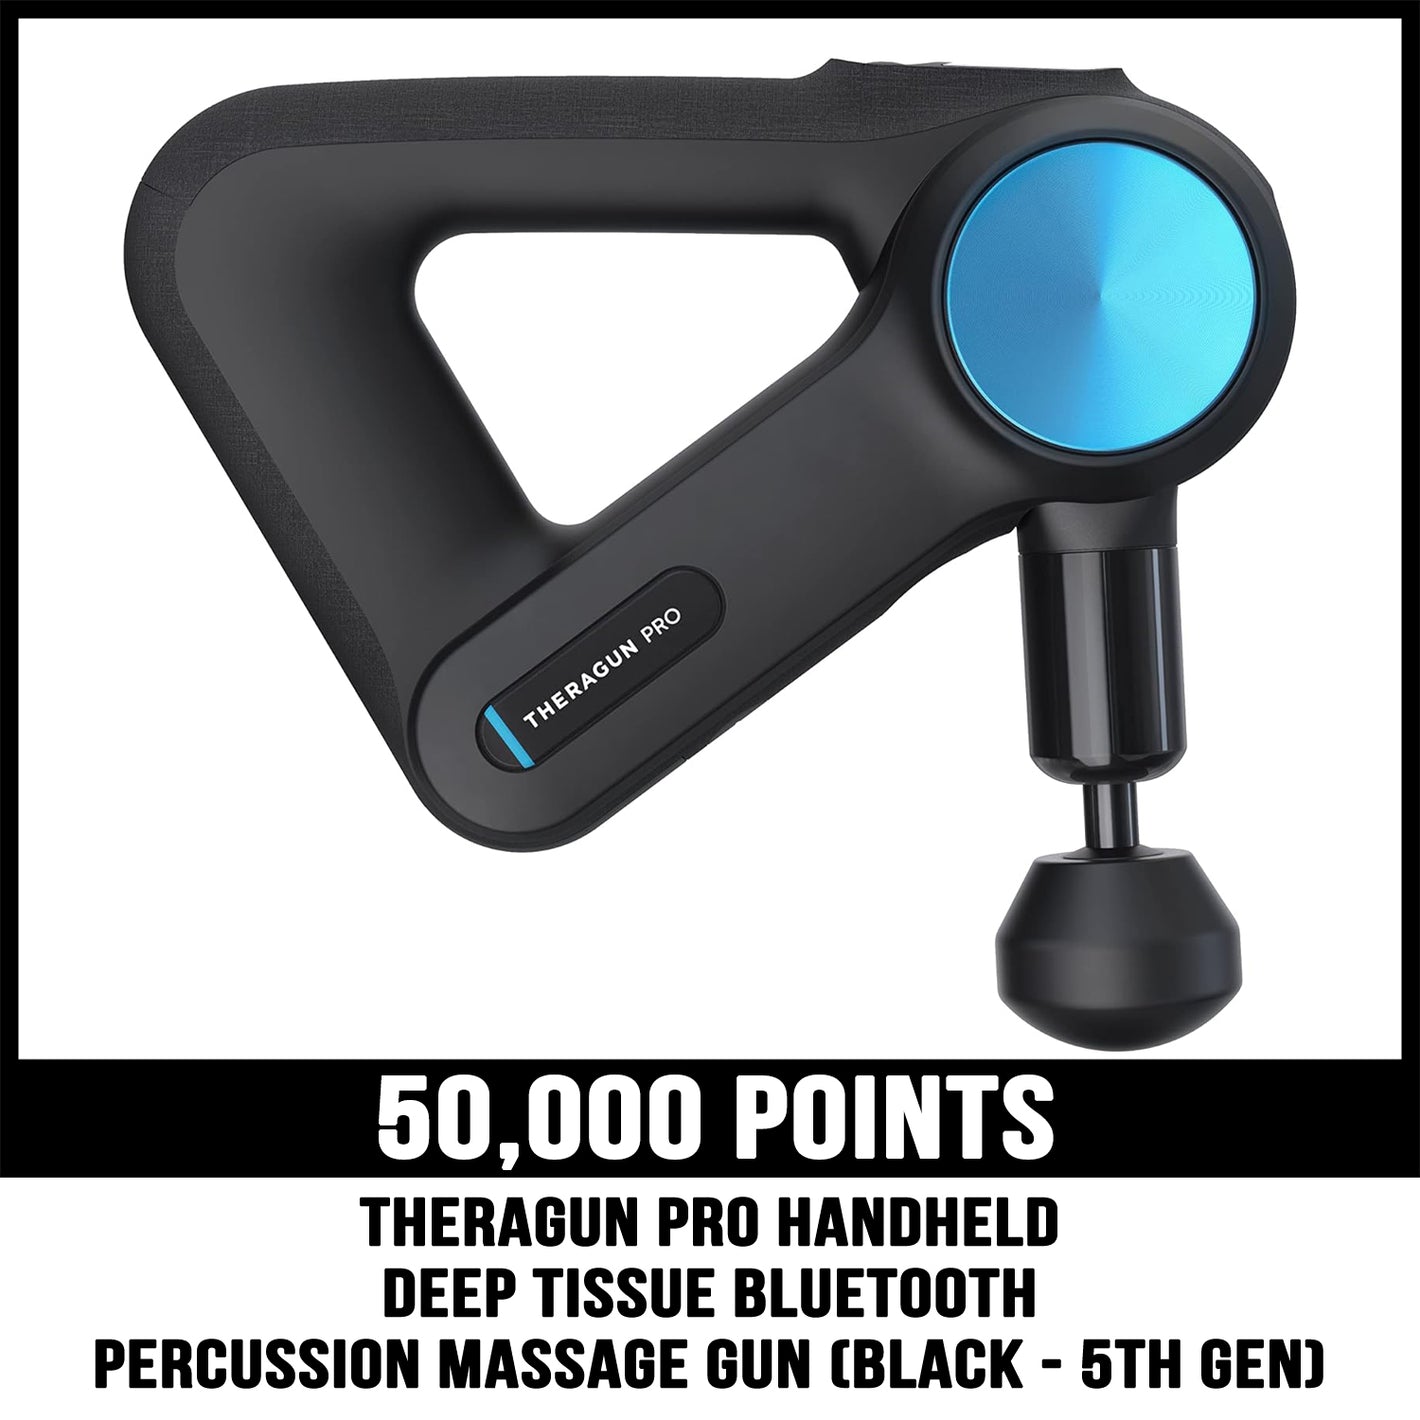 TheraGun Pro massager prize for 50000 points